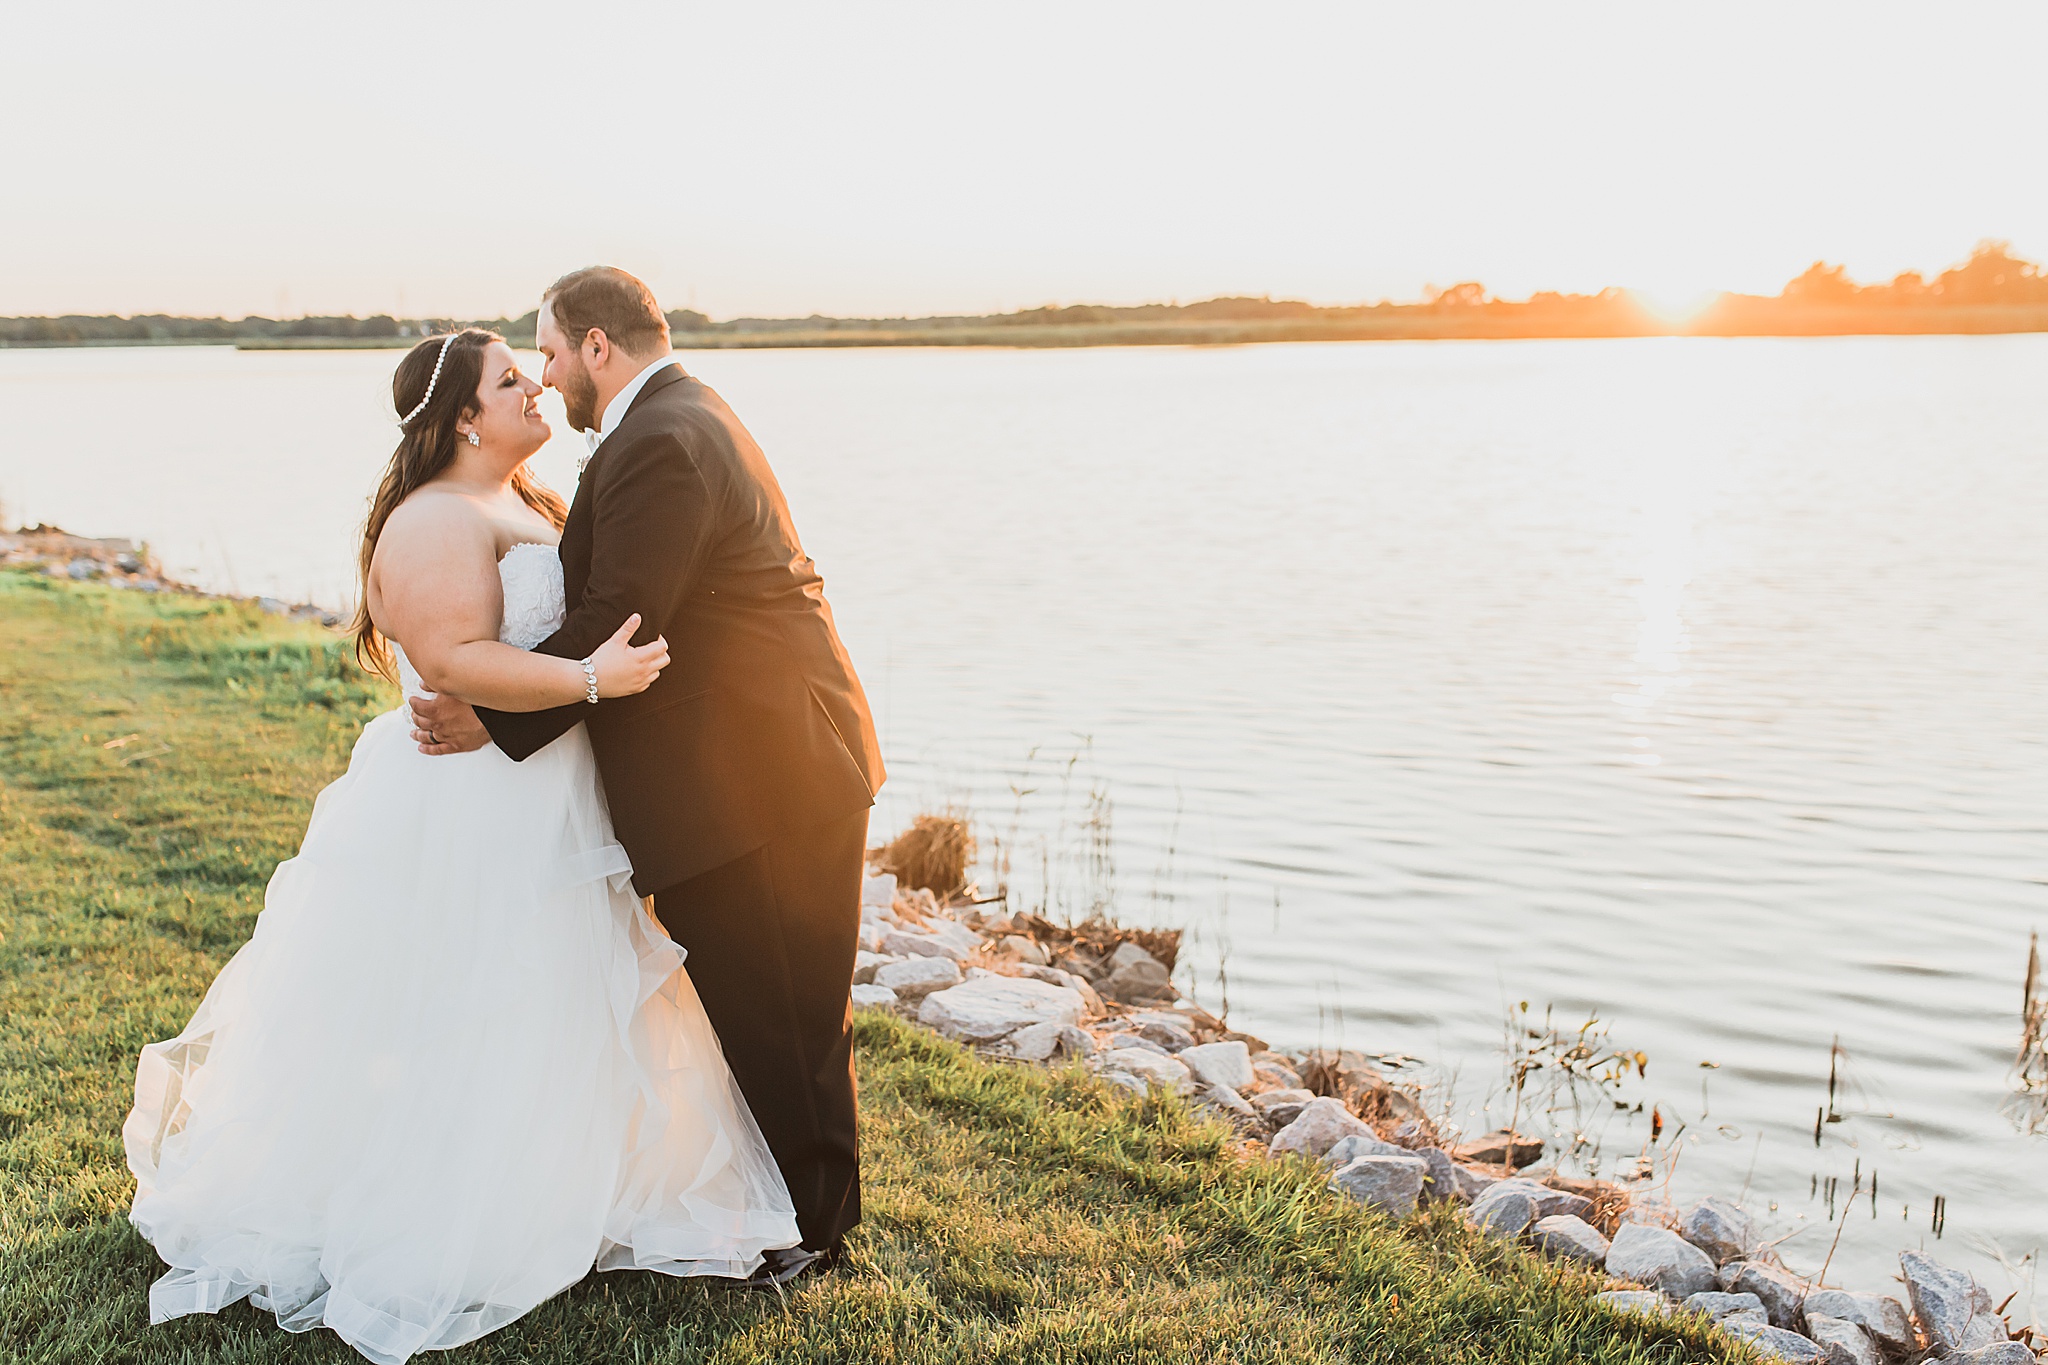 Thousand Acre farm wedding day photographed by M Harris Studios